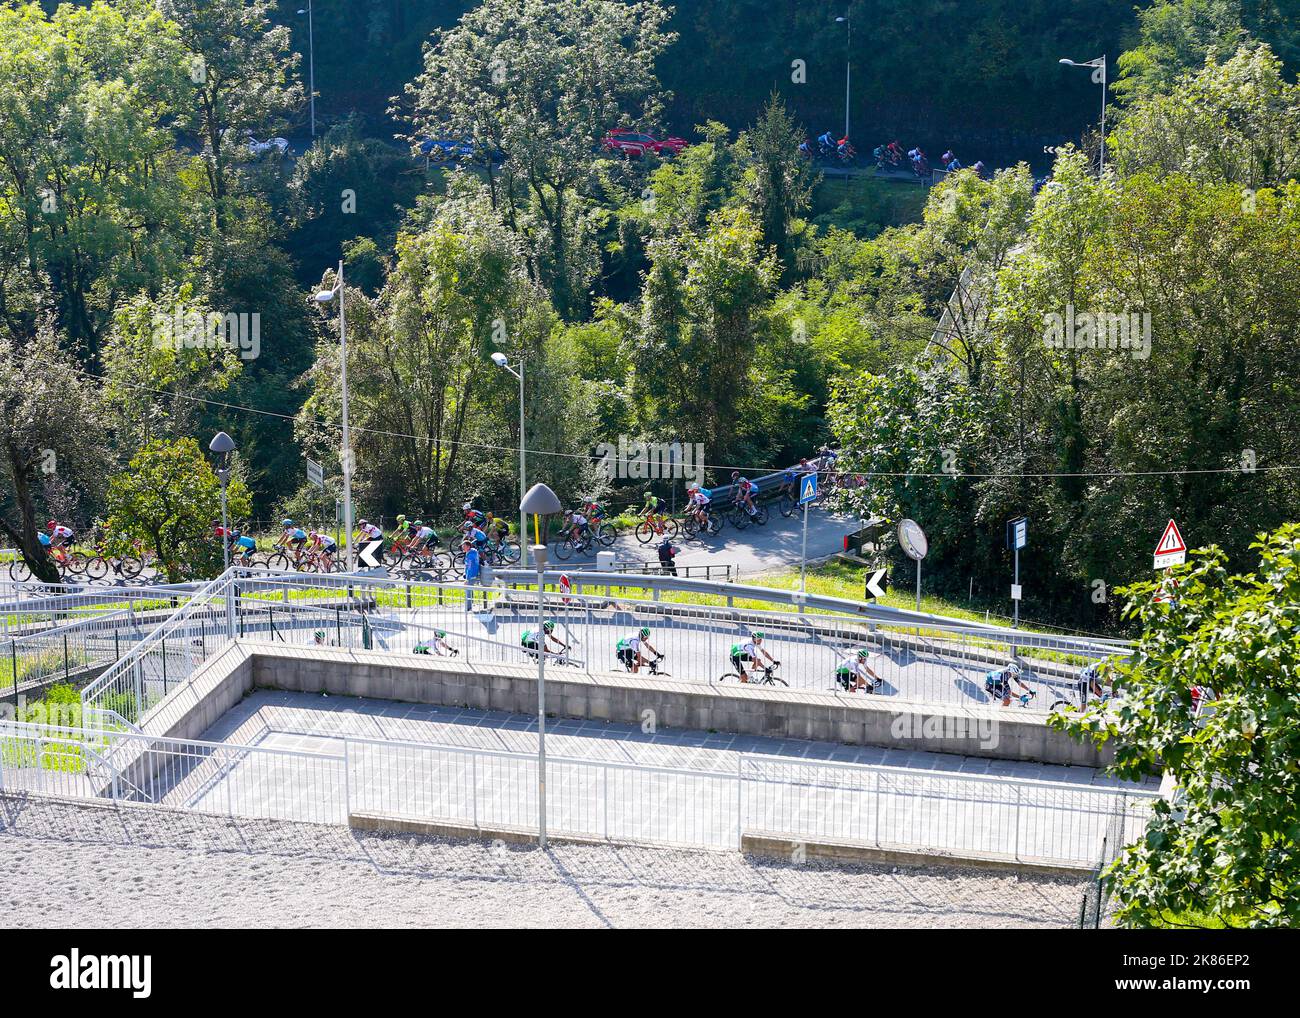 The peloton during the Il Lombardia 2019 race in Lombardia, Italy on Saturday October 12, 2019. Stock Photo